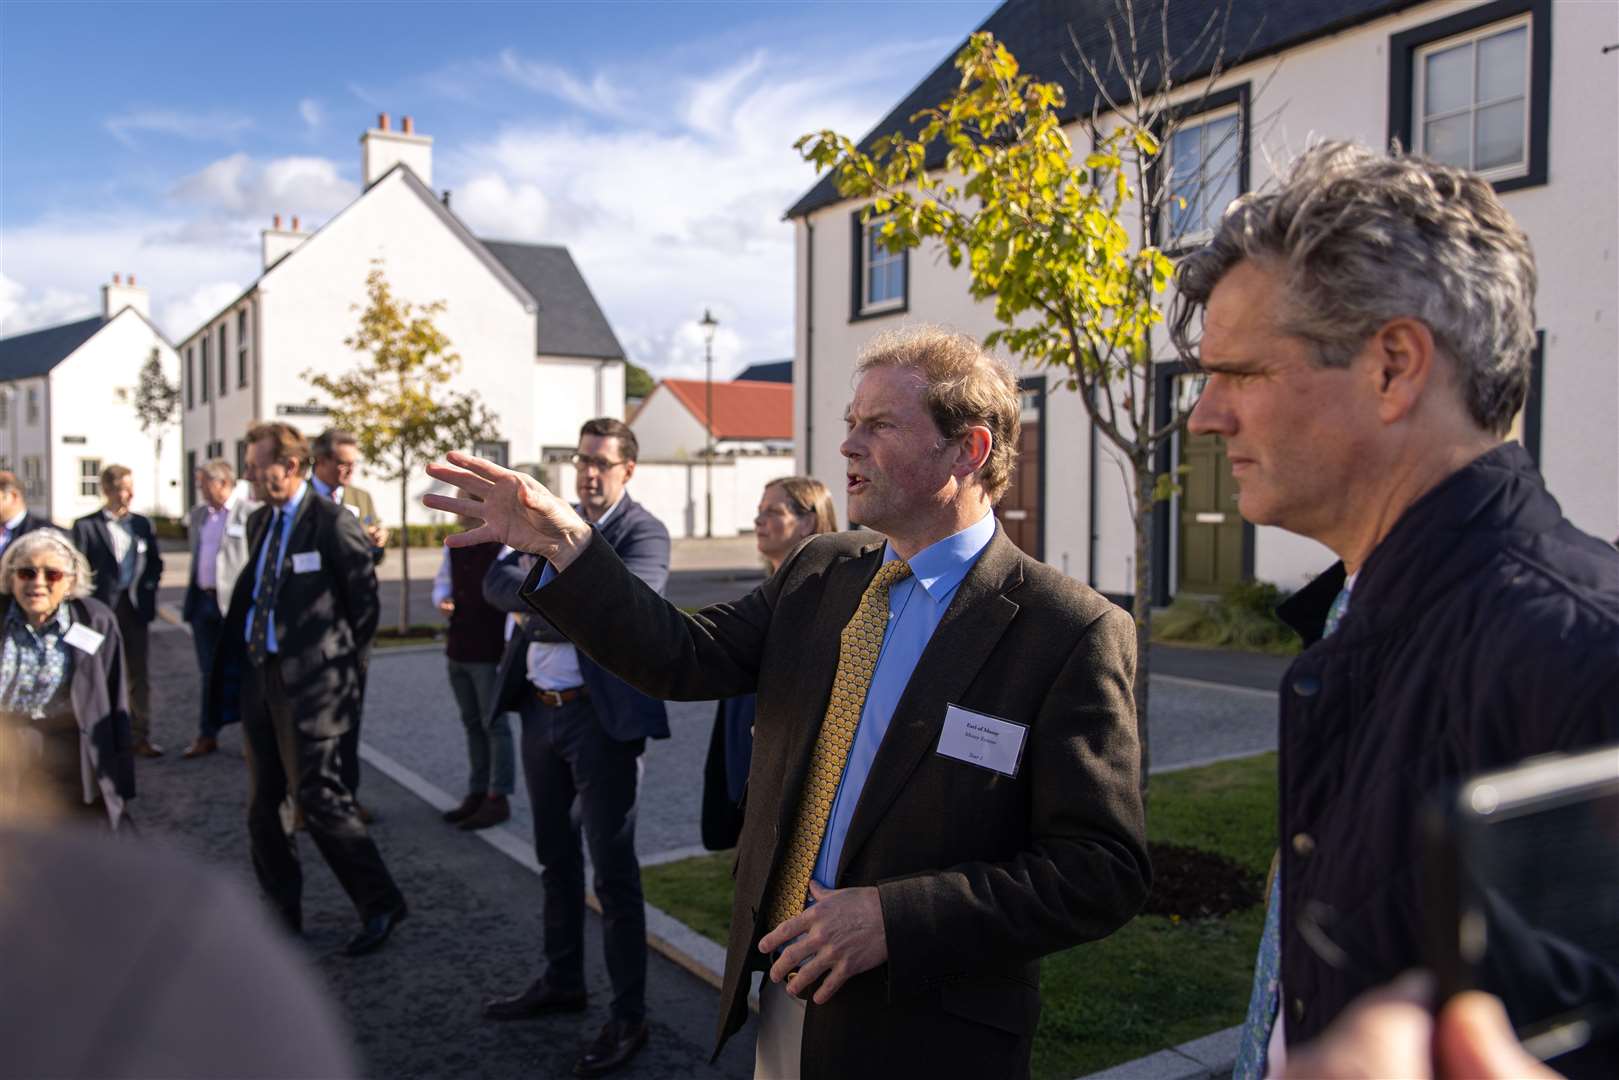 John Moray shows delegates around Tornagrain during the Prince's Foundation event to look at building sustainable new communities.